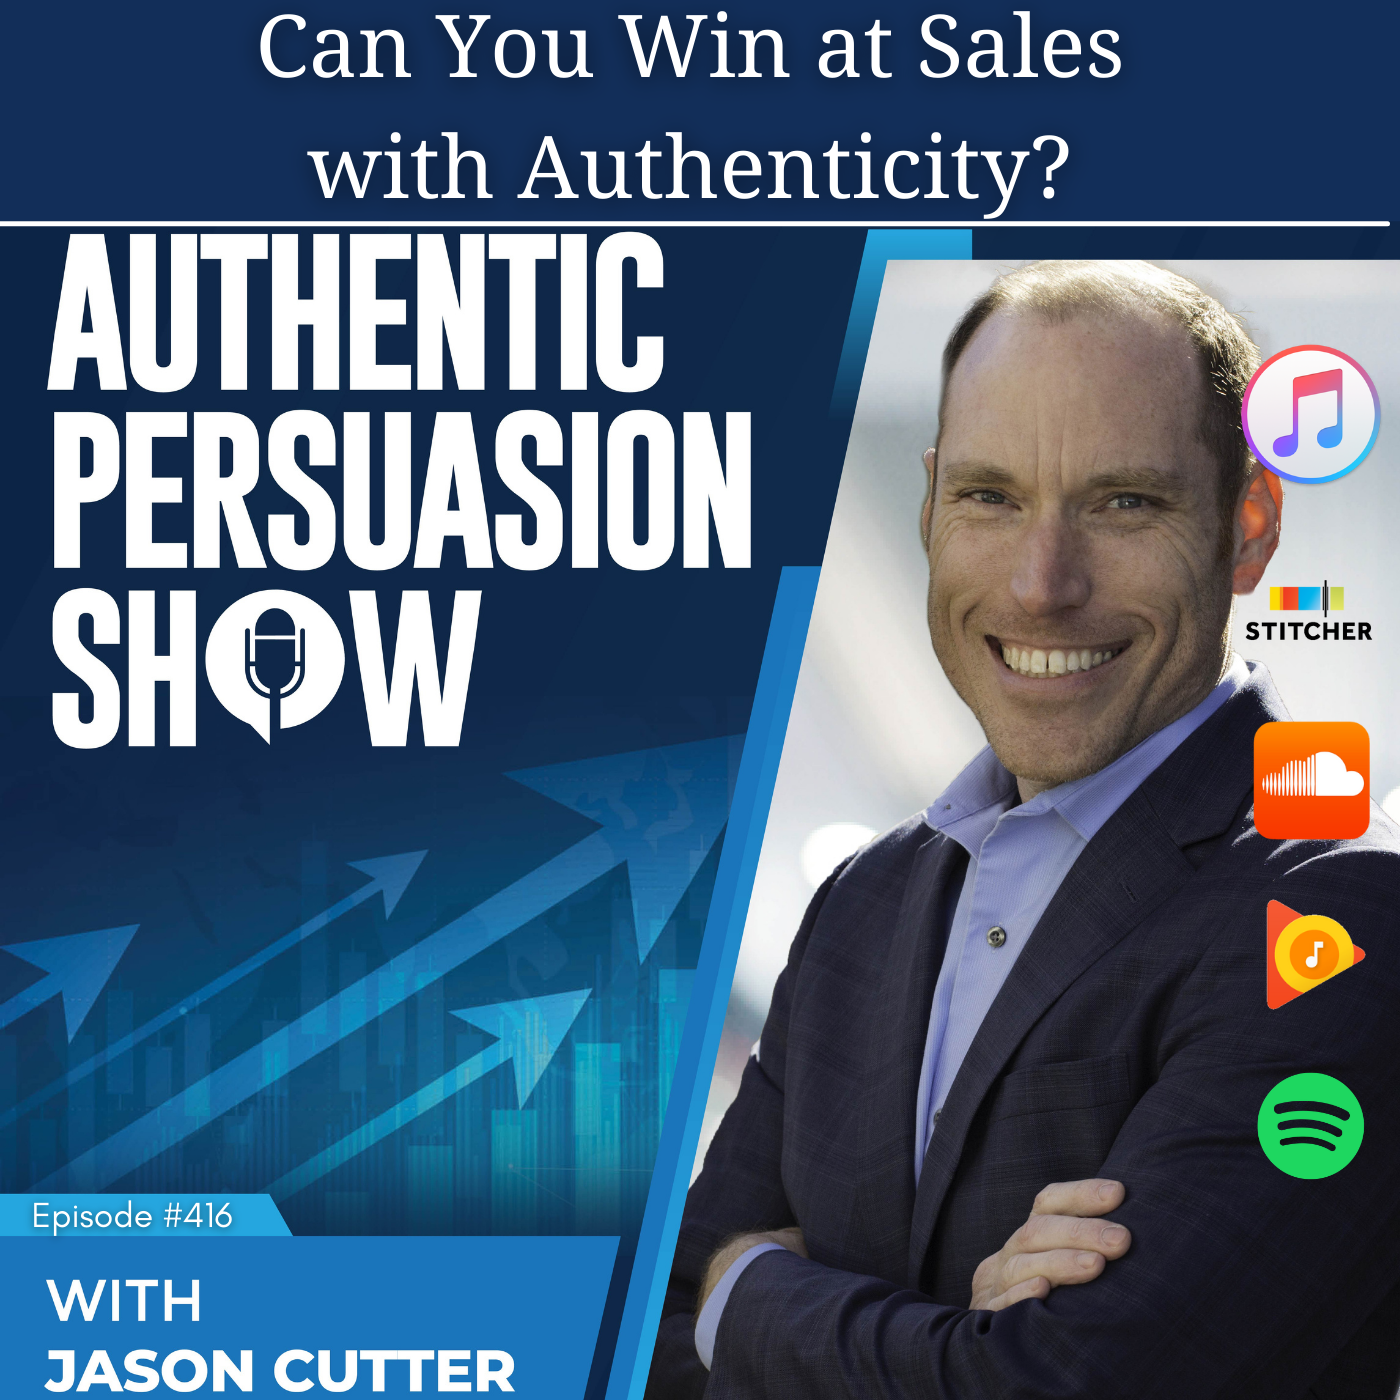 [E416] Can You Win at Sales with Authenticity?